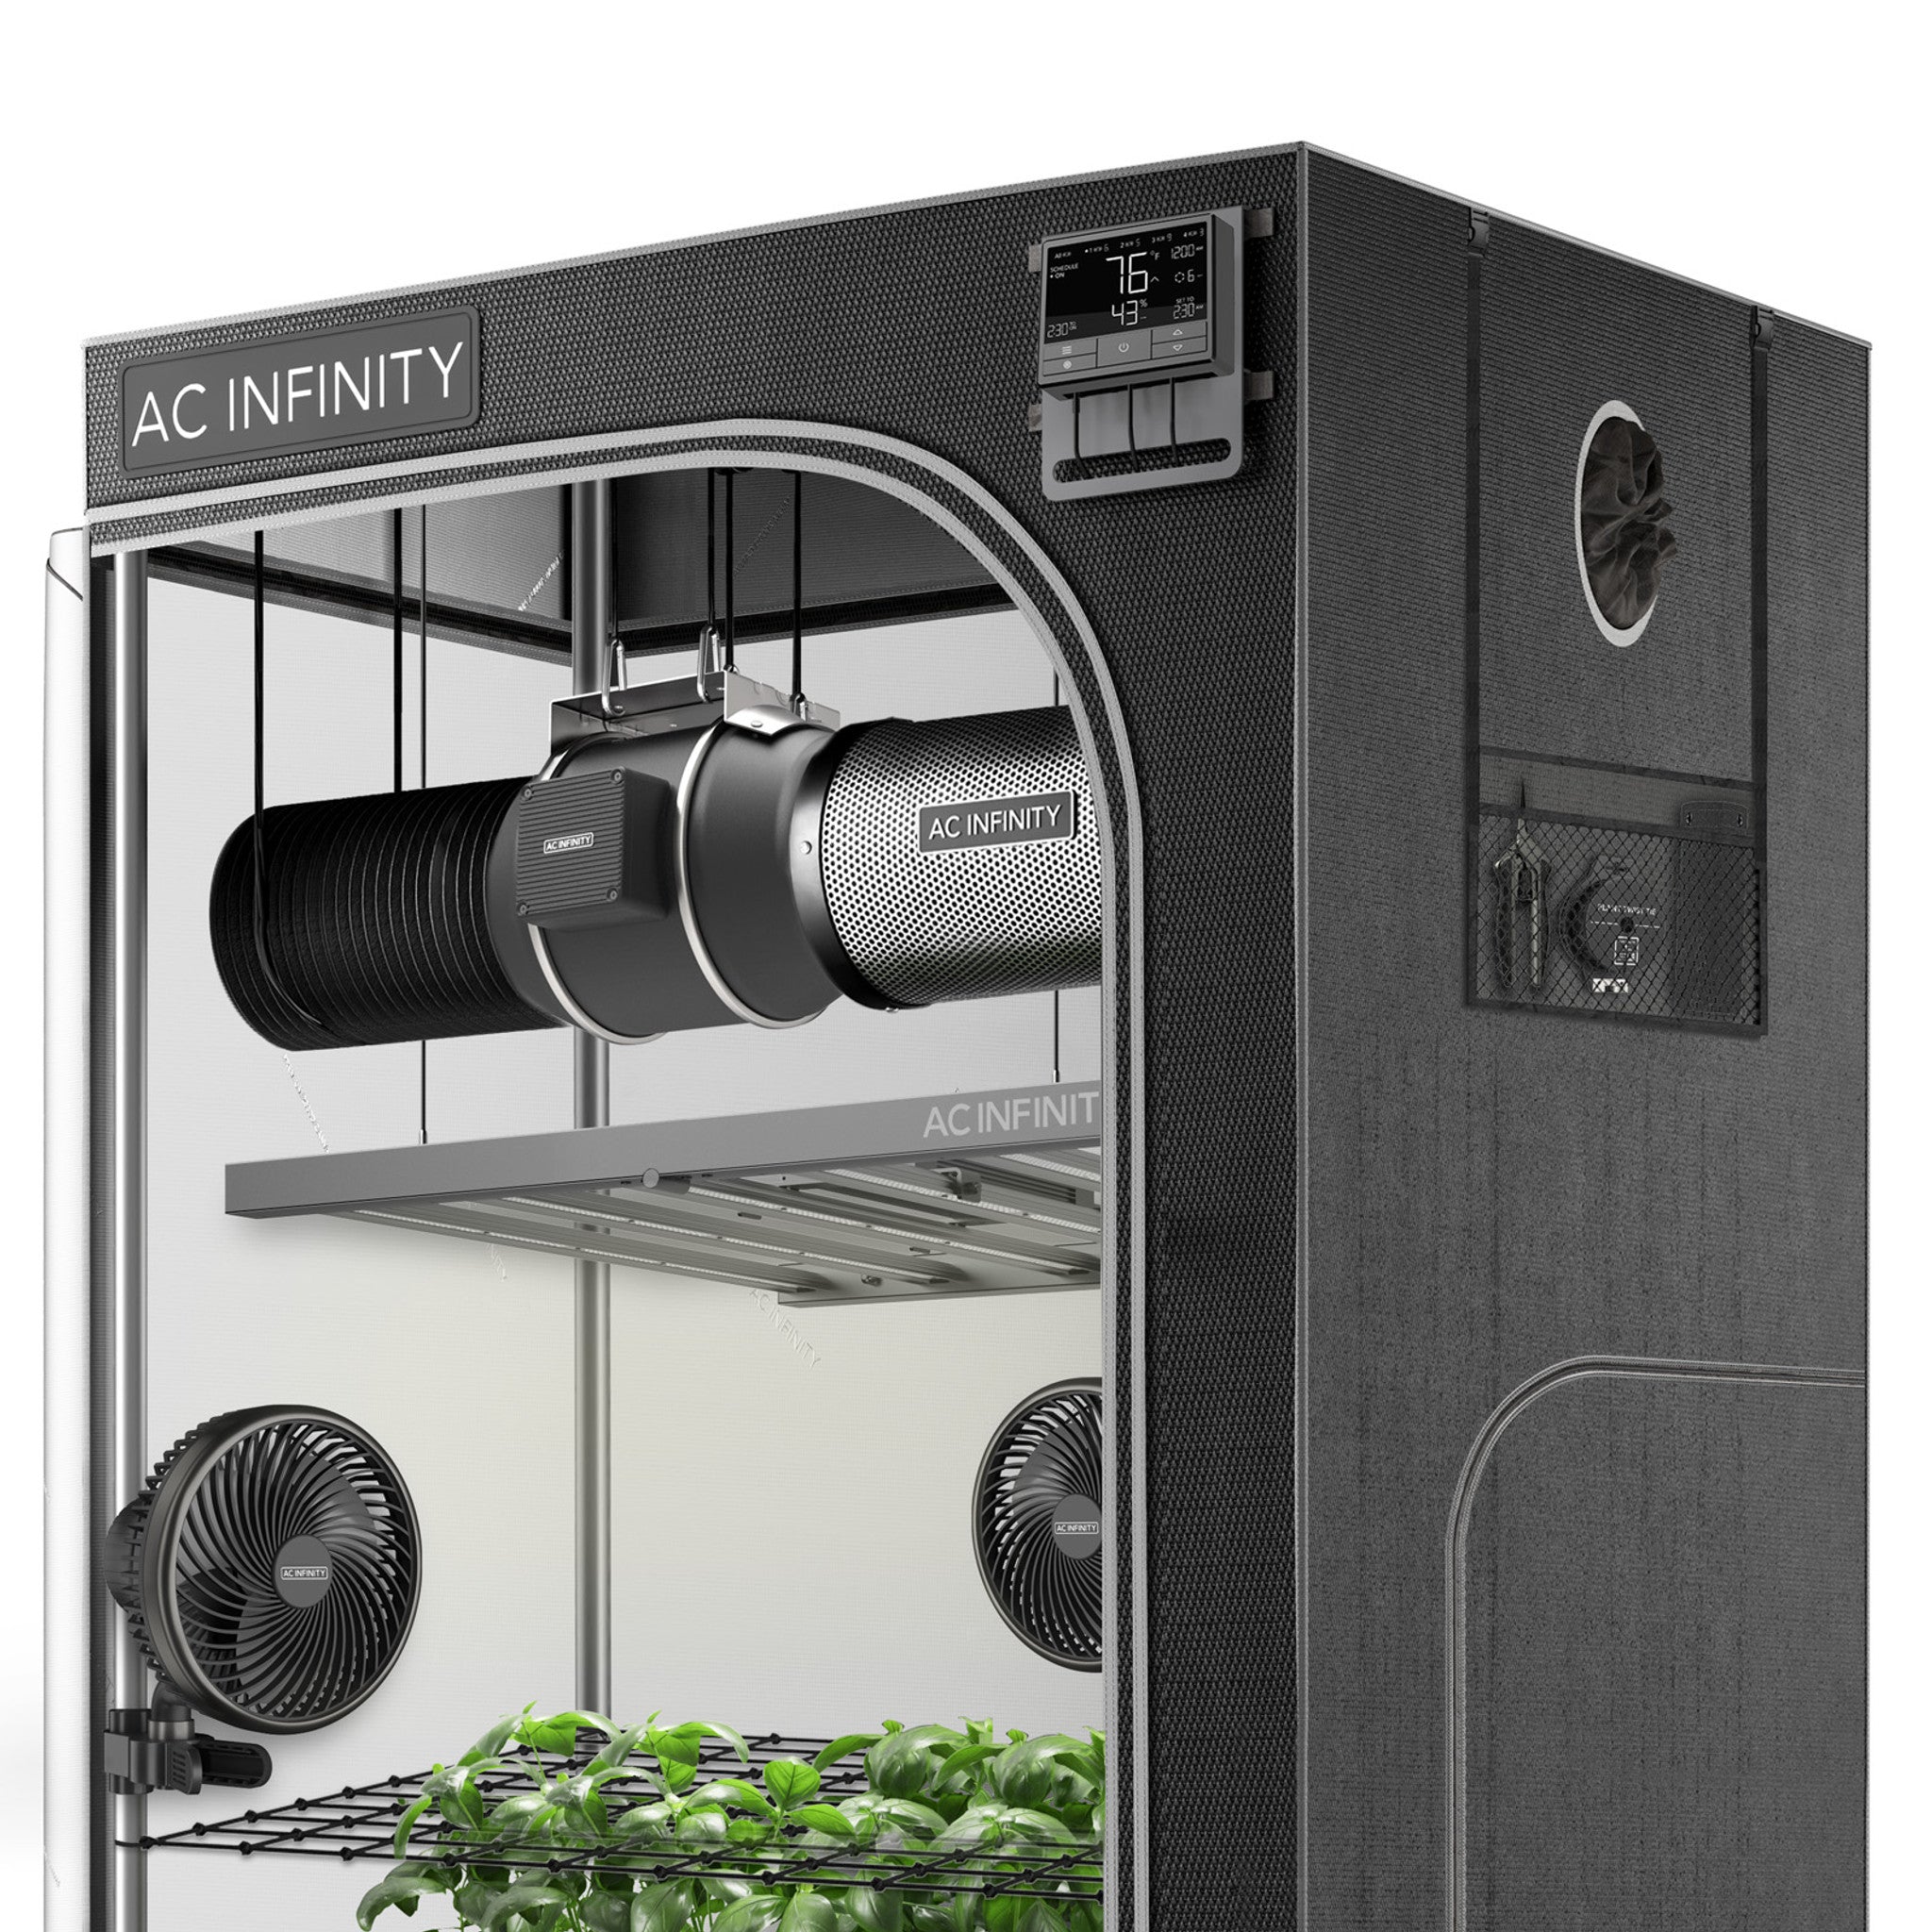 Product Image:AC INFINITY ADVANCE GROW TENT SYSTEM PRO 4X4, 4-PLANT KIT, WIFI-INTEGRATED CONTROLS TO AUTOMATE VENTILATION, CIRCULATION, FULL SPECTRUM LM301H EVO LED GROW LIGHT